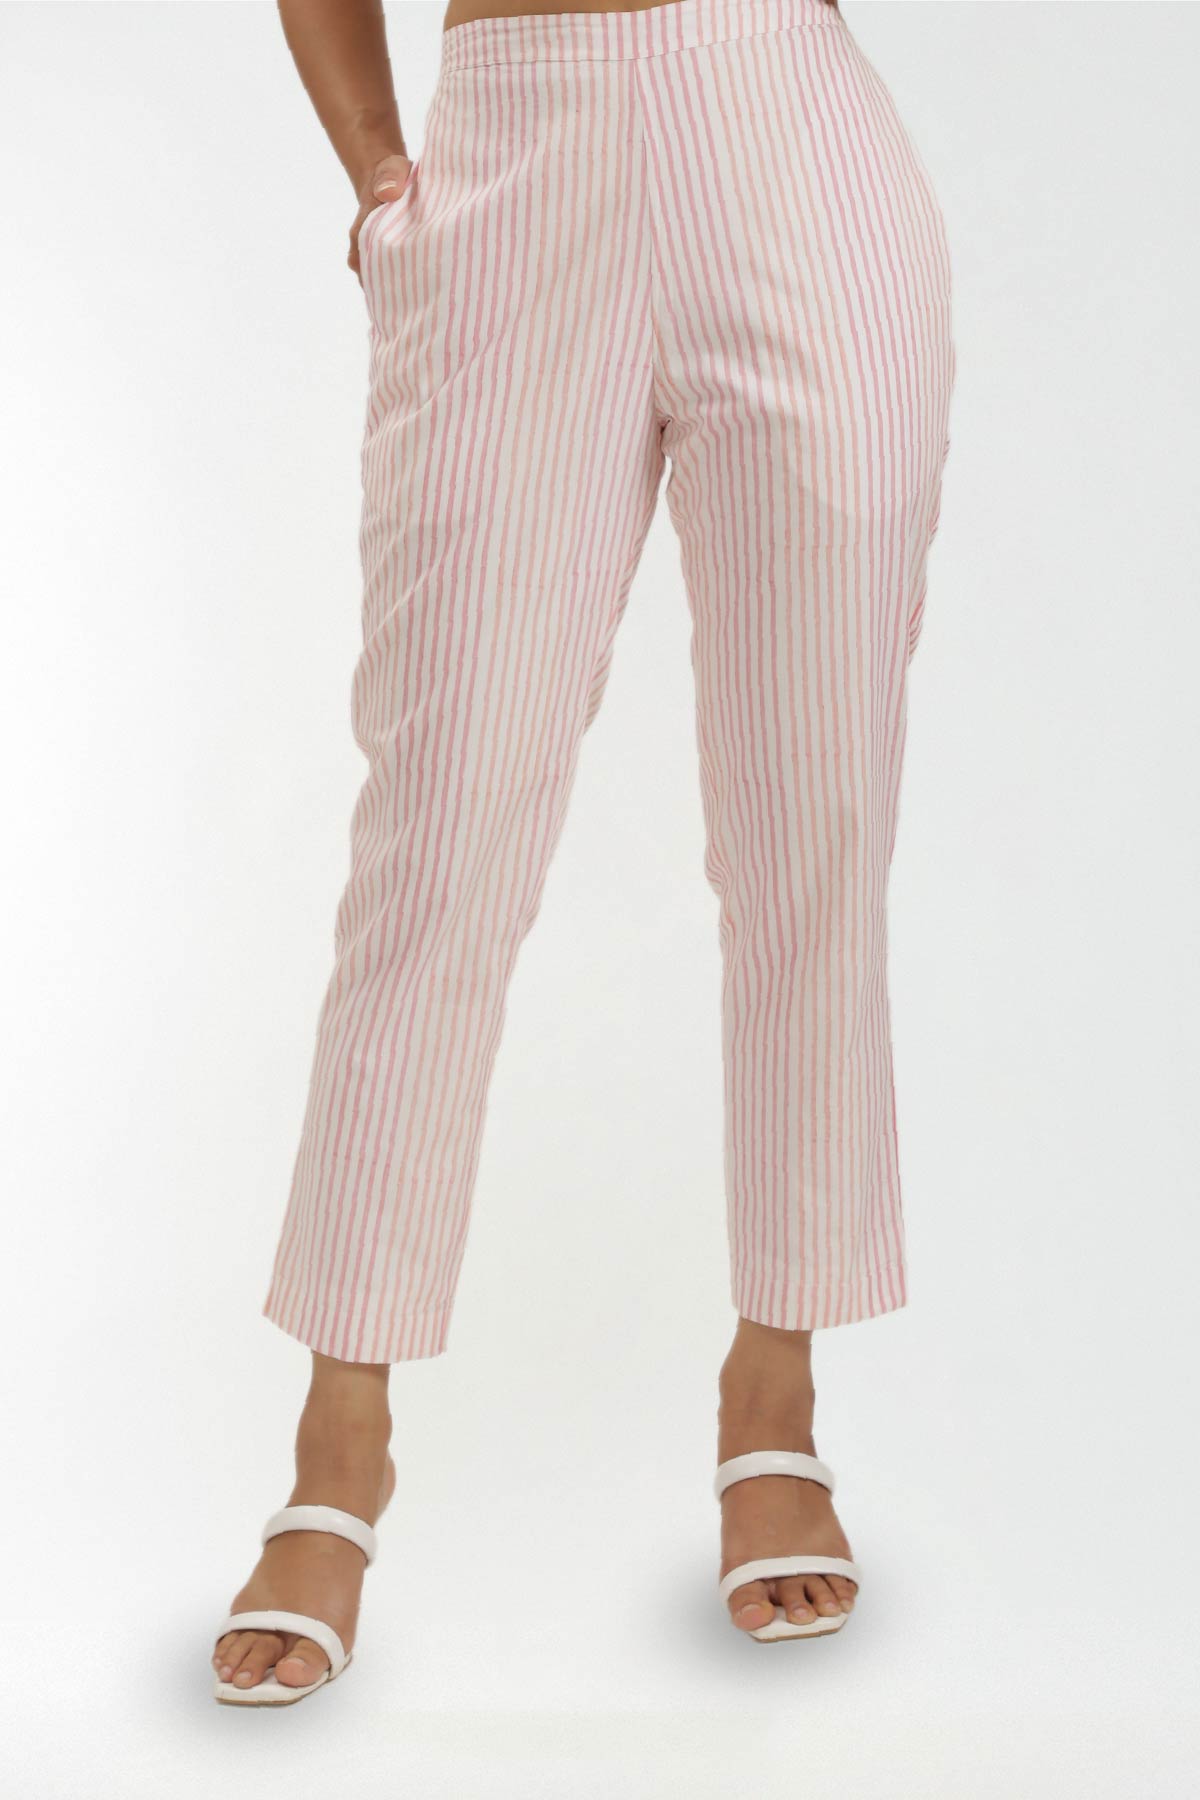 Aria Pink Tapered Pants